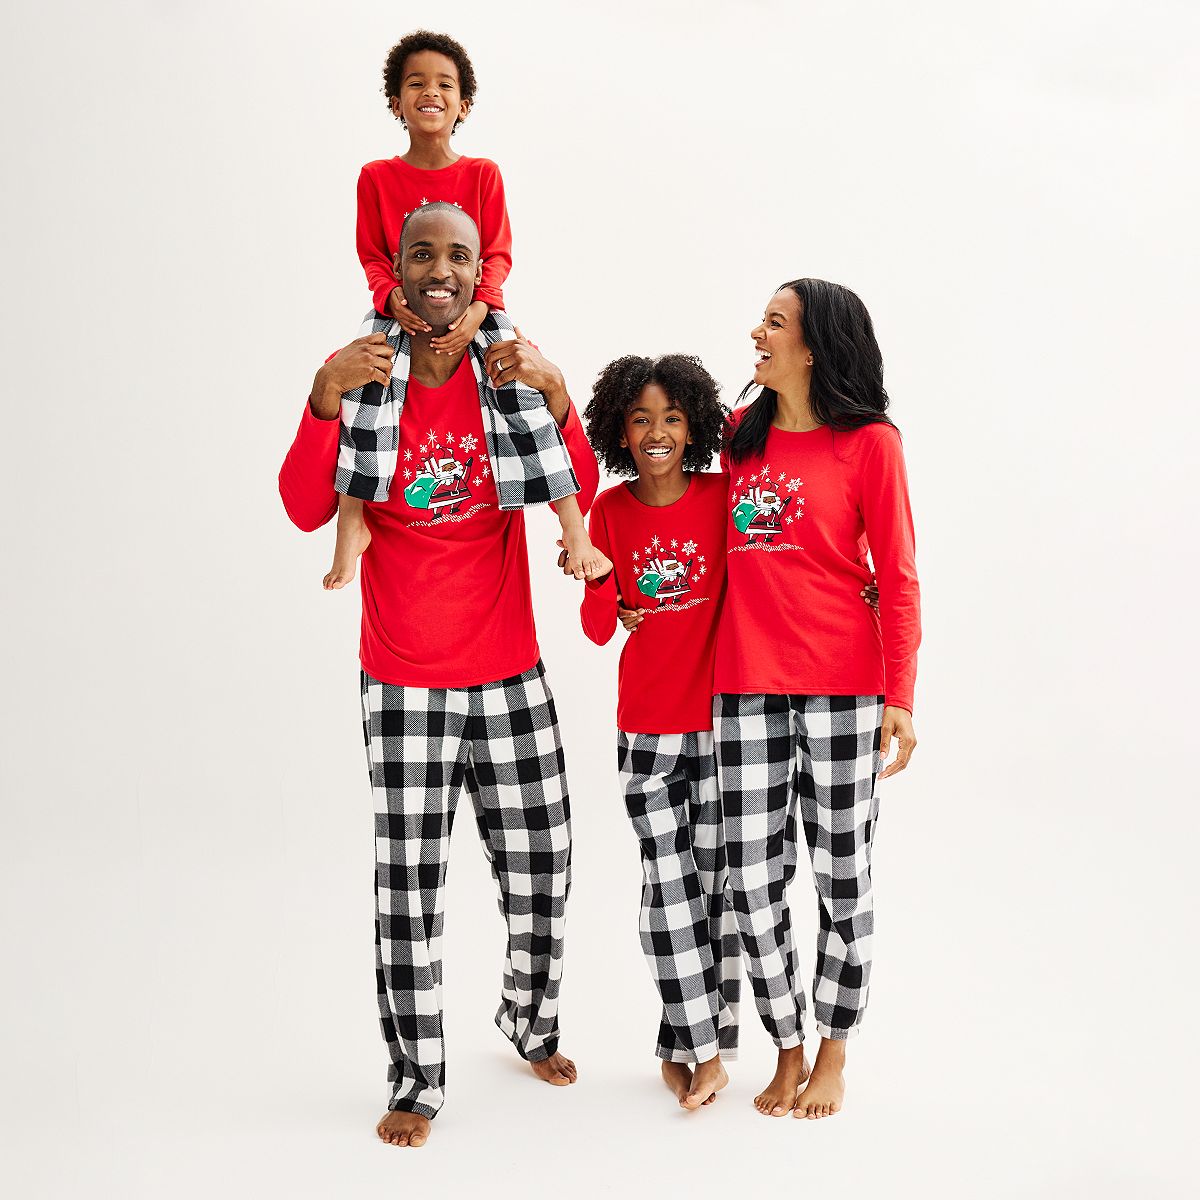 kohl's Jammies For Your Families® Baby Frosty The Snowman Stay Cool  One-Piece Pajamas, Kohls